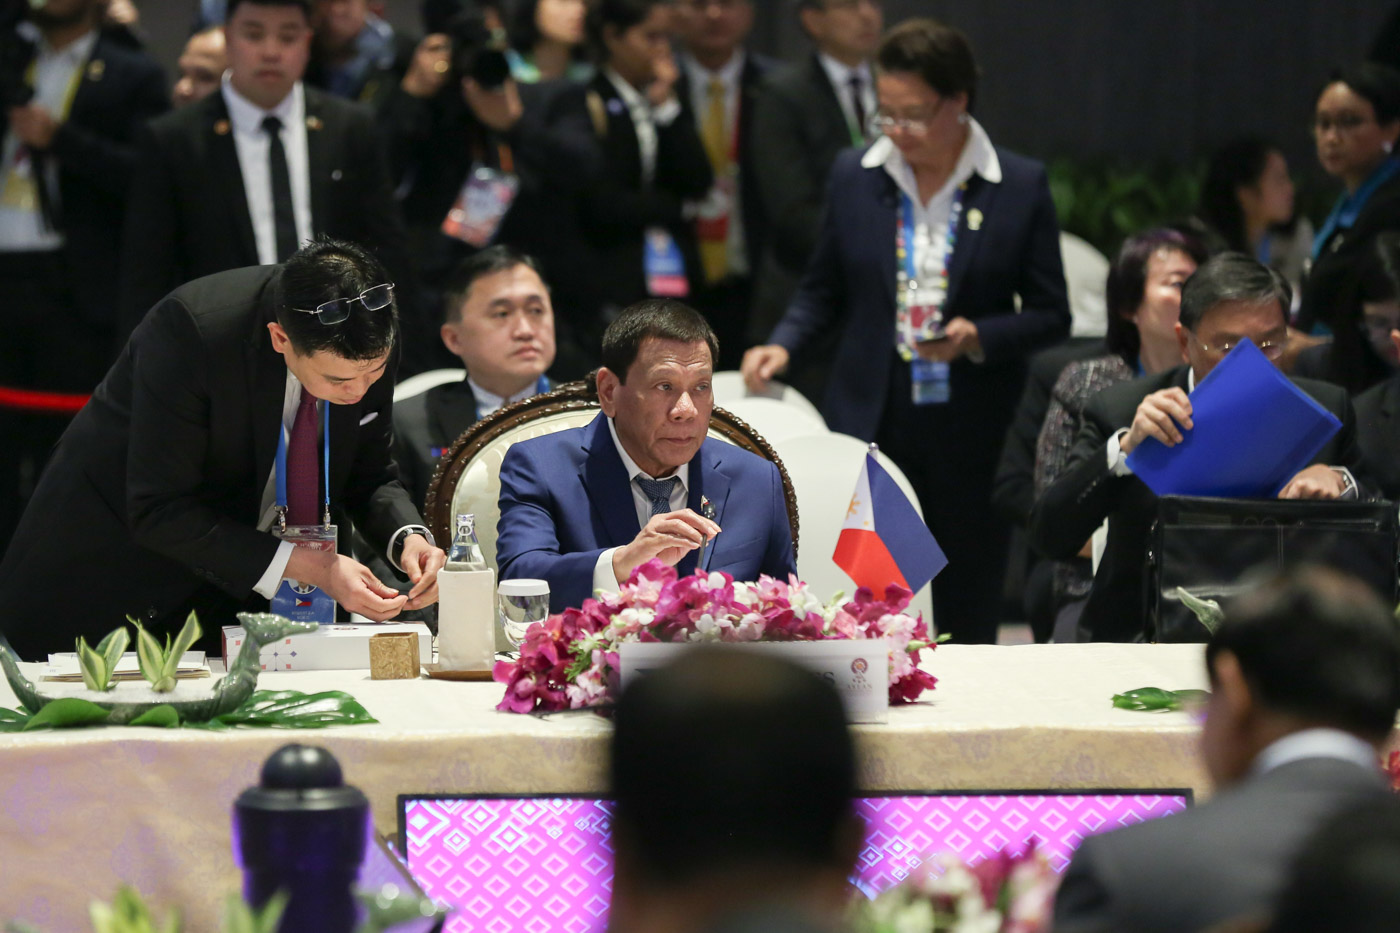 DUTERTE. President Rodrigo Roa Duterte joins other leaders from the Association of Southeast Asian Nations member countries during the 35th ASEAN Summit Plenary at Impact Exhibition and Convention Center in Nonthaburi, Thailand on November 2, 2019. Malacañang photo 